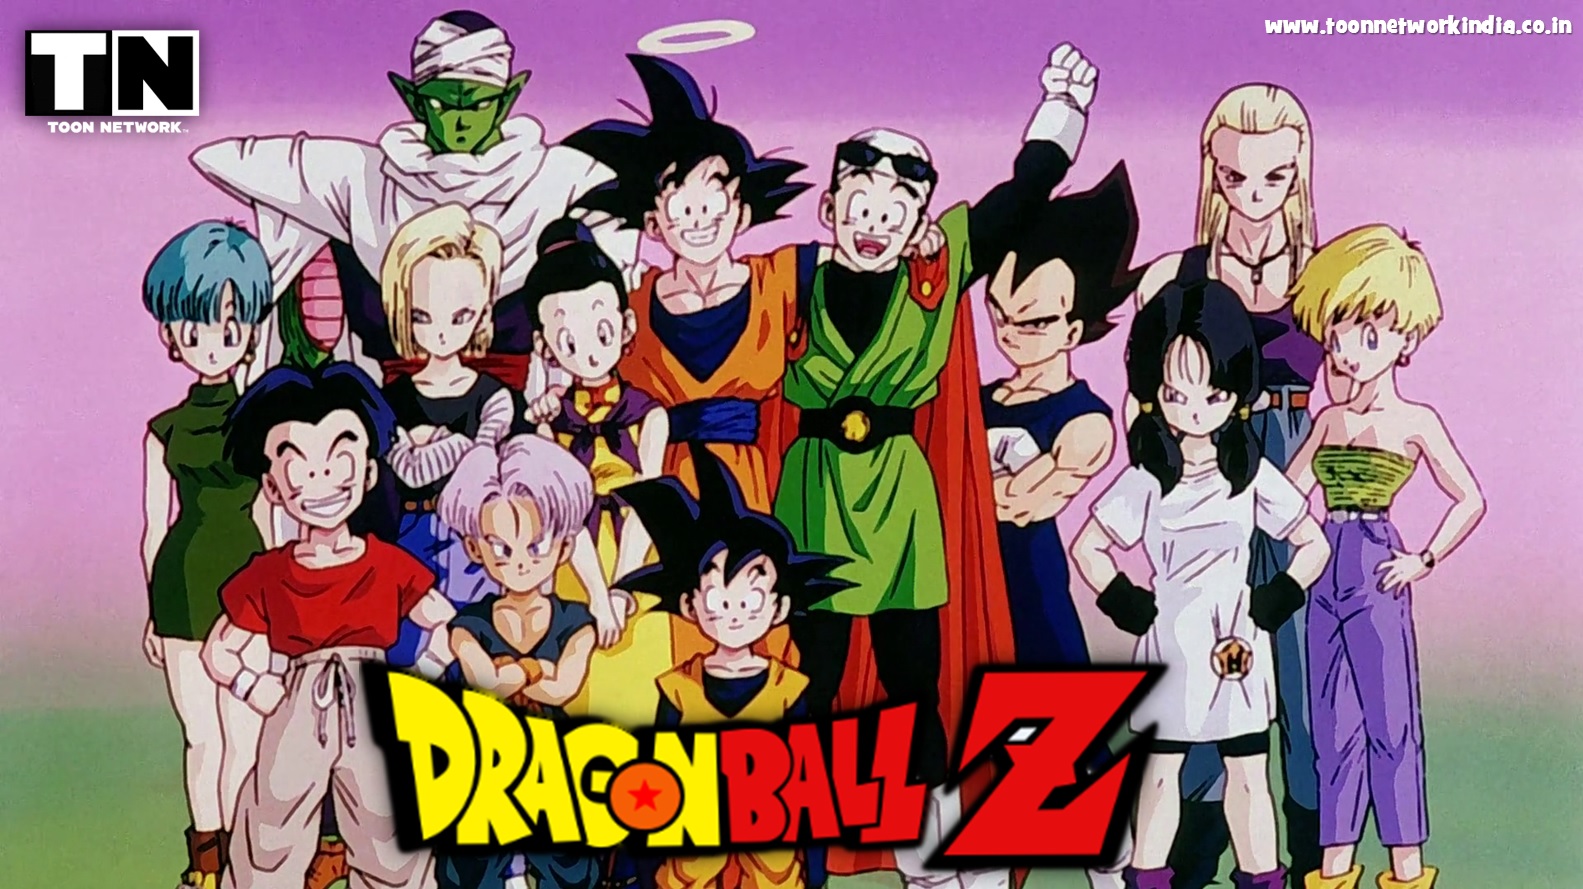 Dragon%2BBall%2BZ%2BSeason%2B9%2BFusion%2Band%2BKid%2BBuu%2BSagas%2BHINDI%2BSubbed%2BEpisodes%2Bwww.toonnetworkindia.co.in